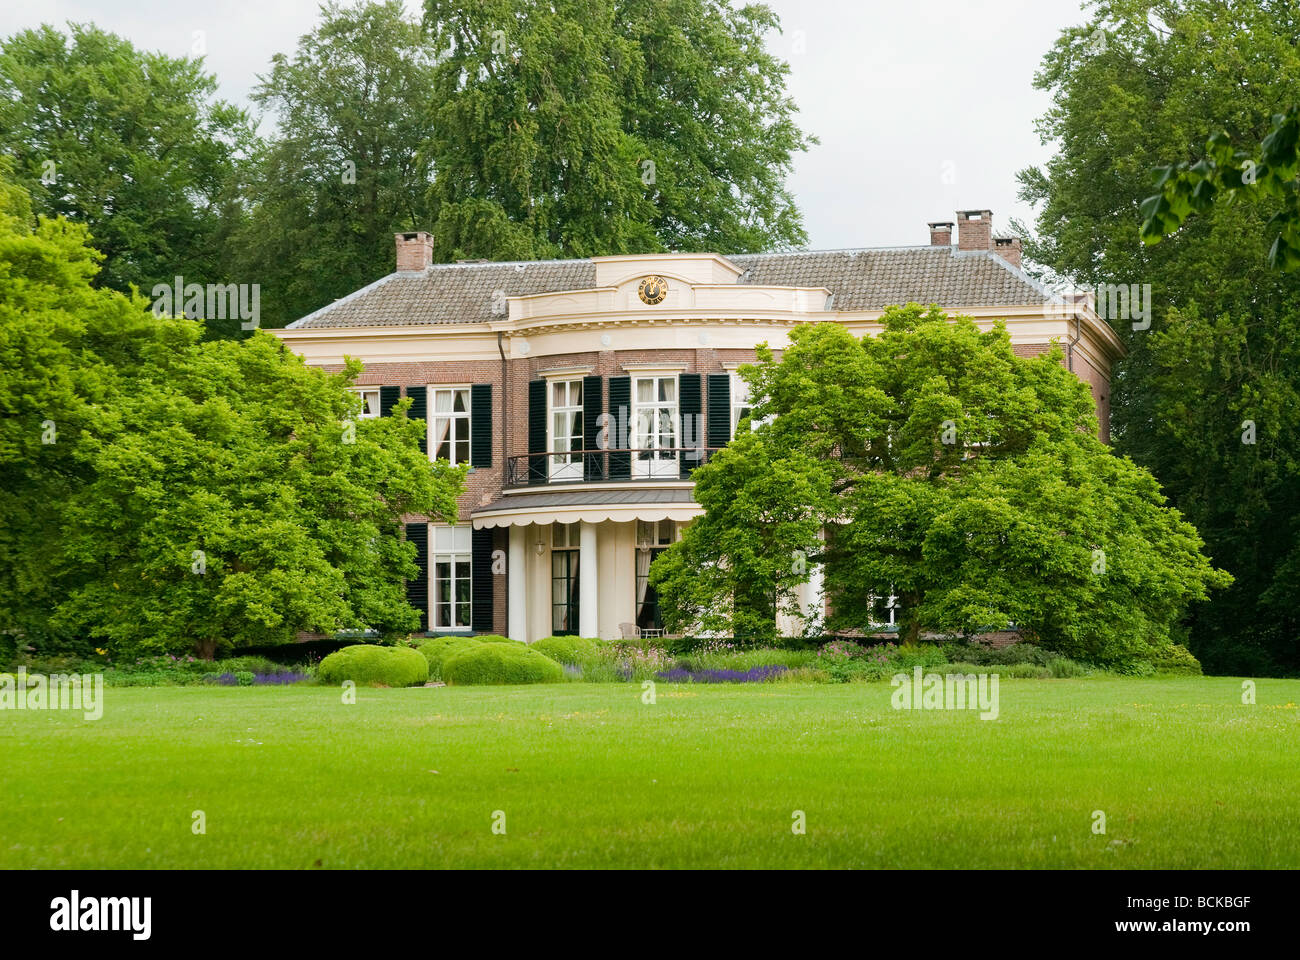 Mansion 't Enzerinck in Vorden, Netherlands, partially covered by lush green trees and a lush green lawn in front Stock Photo